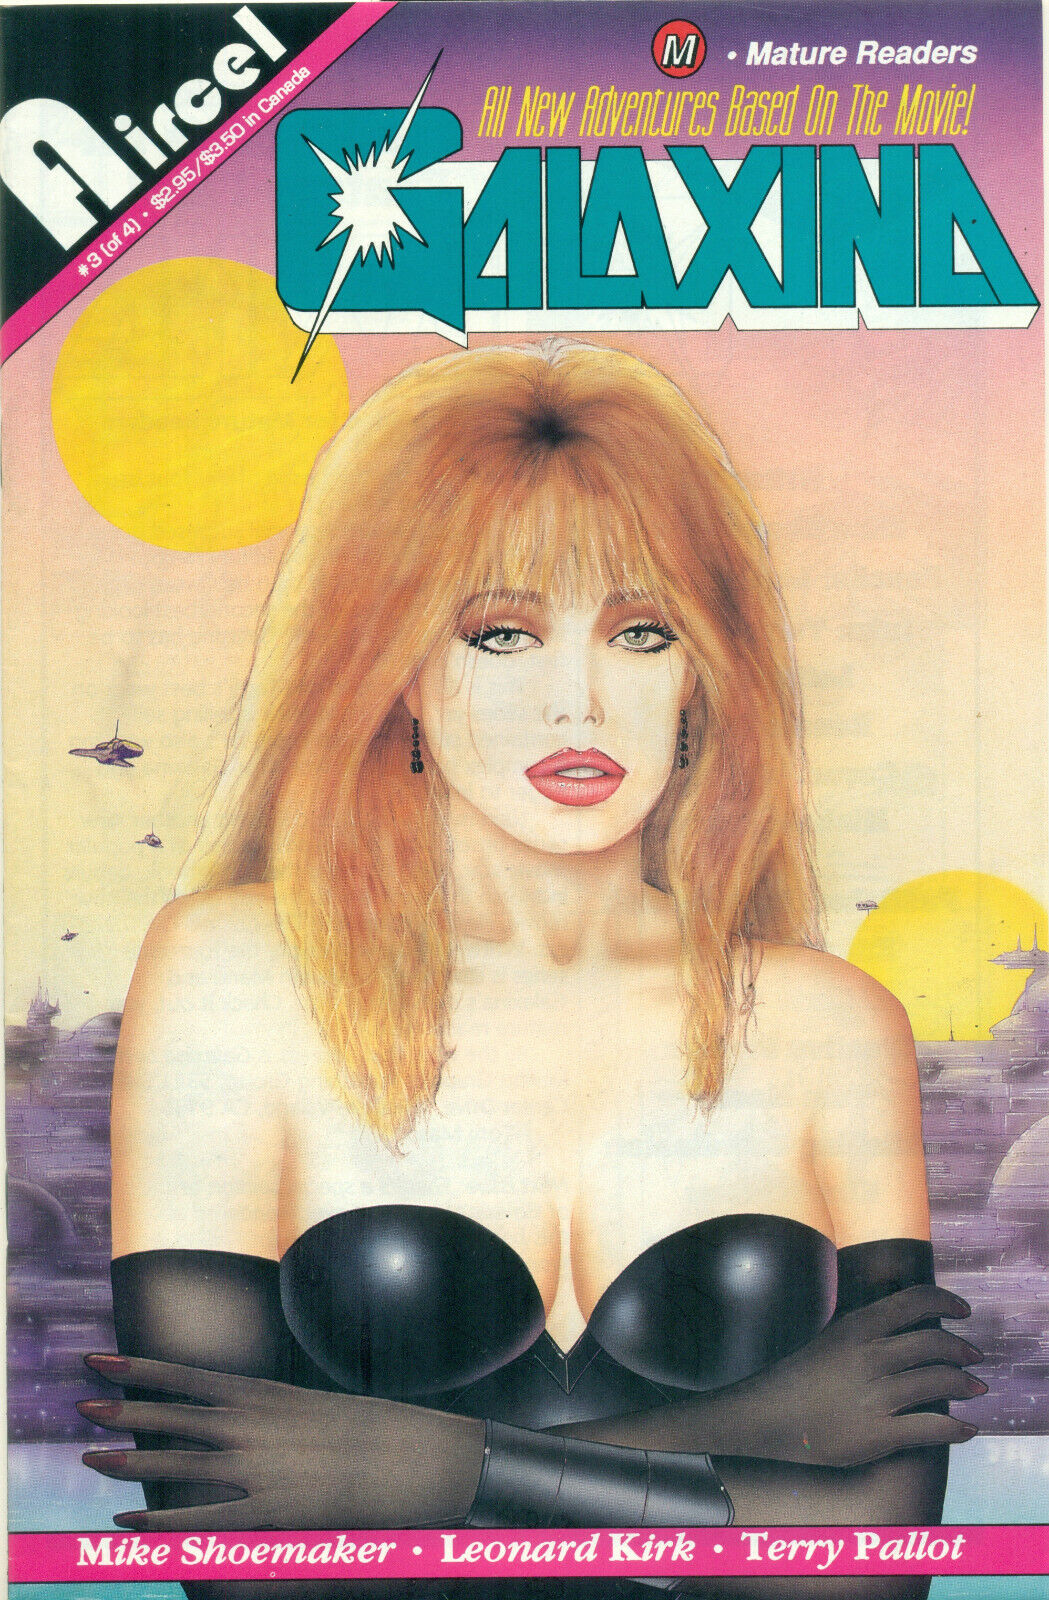 Galaxina #3 By Kirk Dorothy Stratten Sci Fi Movie Painted Cover Aircel 1992